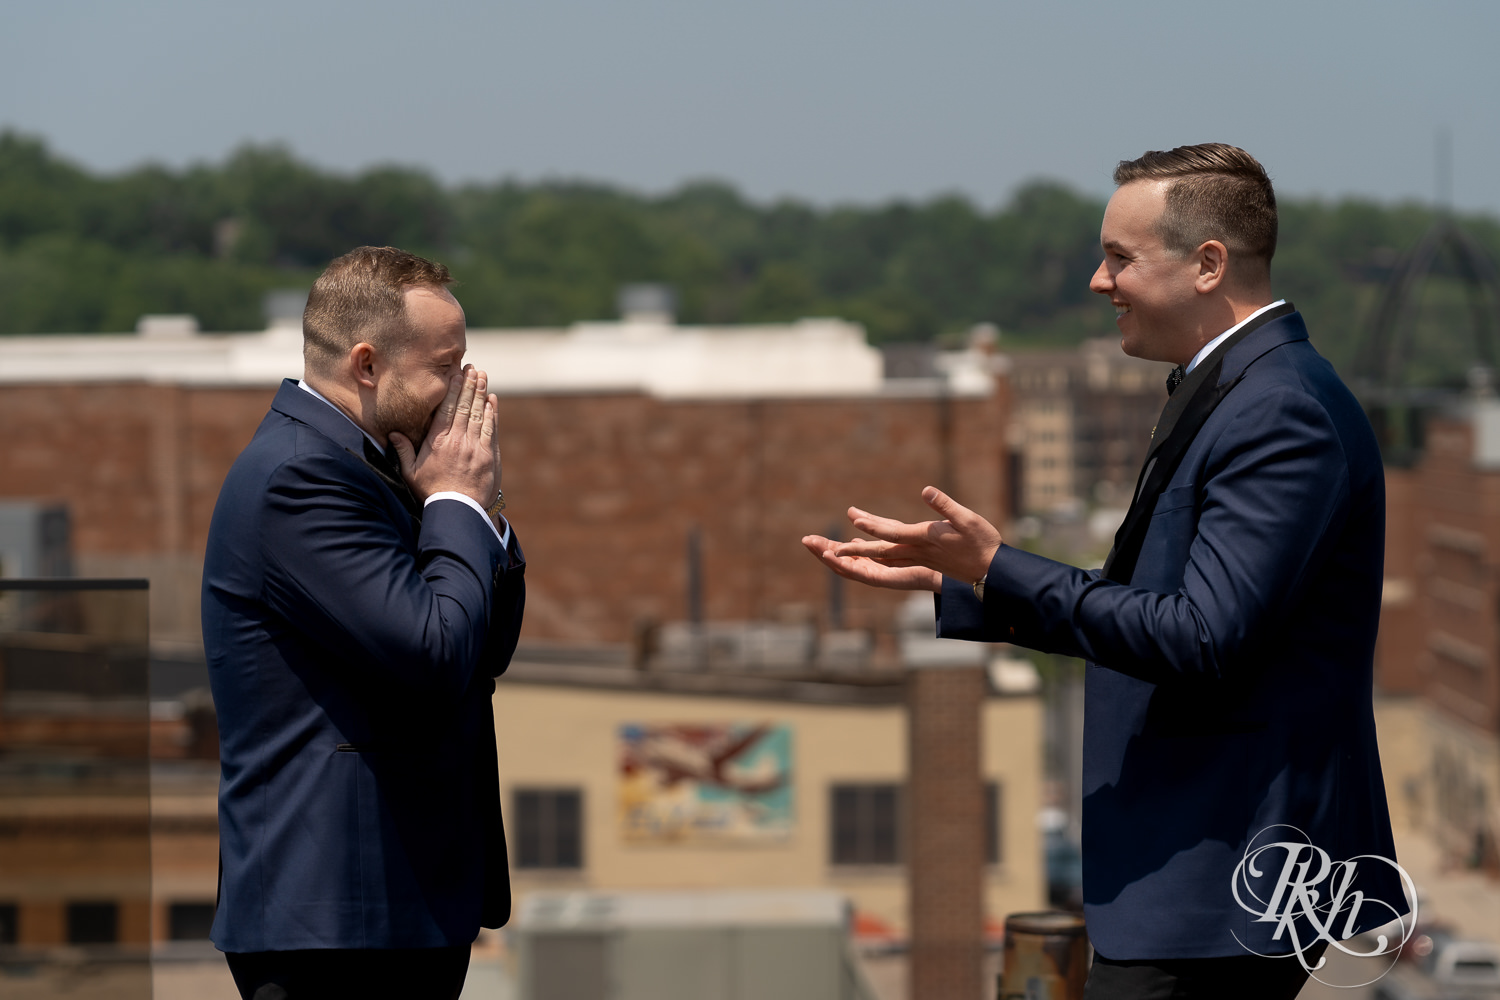 Grooms cries during first look on rooftop before gay wedding in Stillwater, Minnesota.